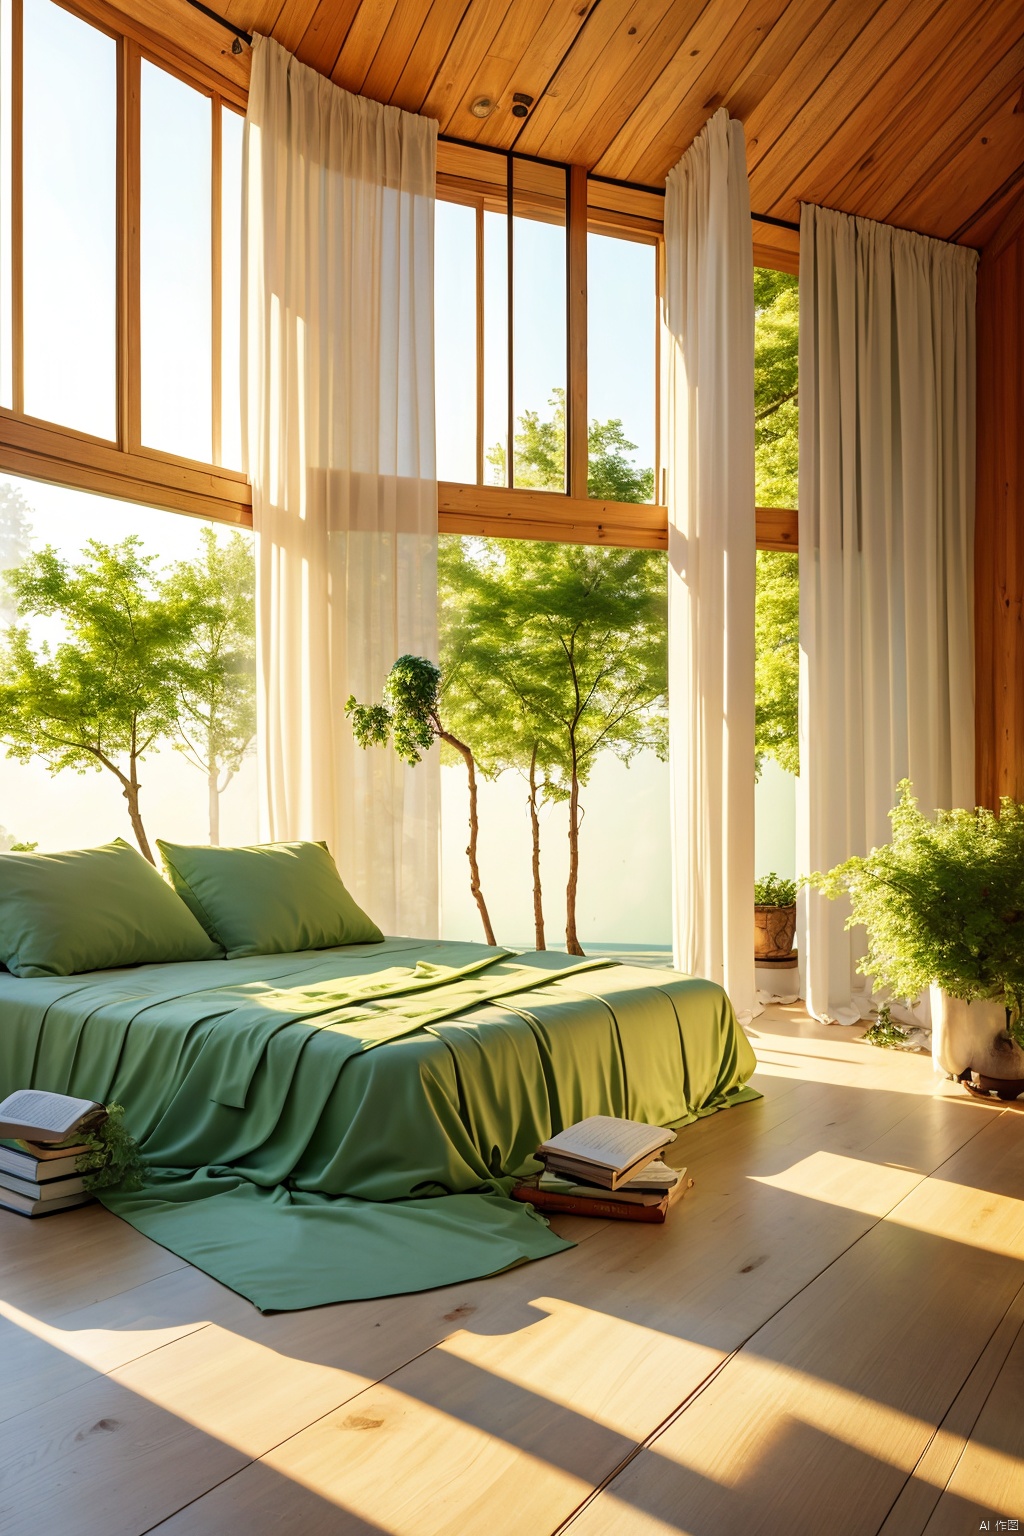 lying, indoors, tree, pillow, book, no humans, window, bed, leaf, sunlight, sleeping, plant, curtains, scenery, wooden floor, blanket